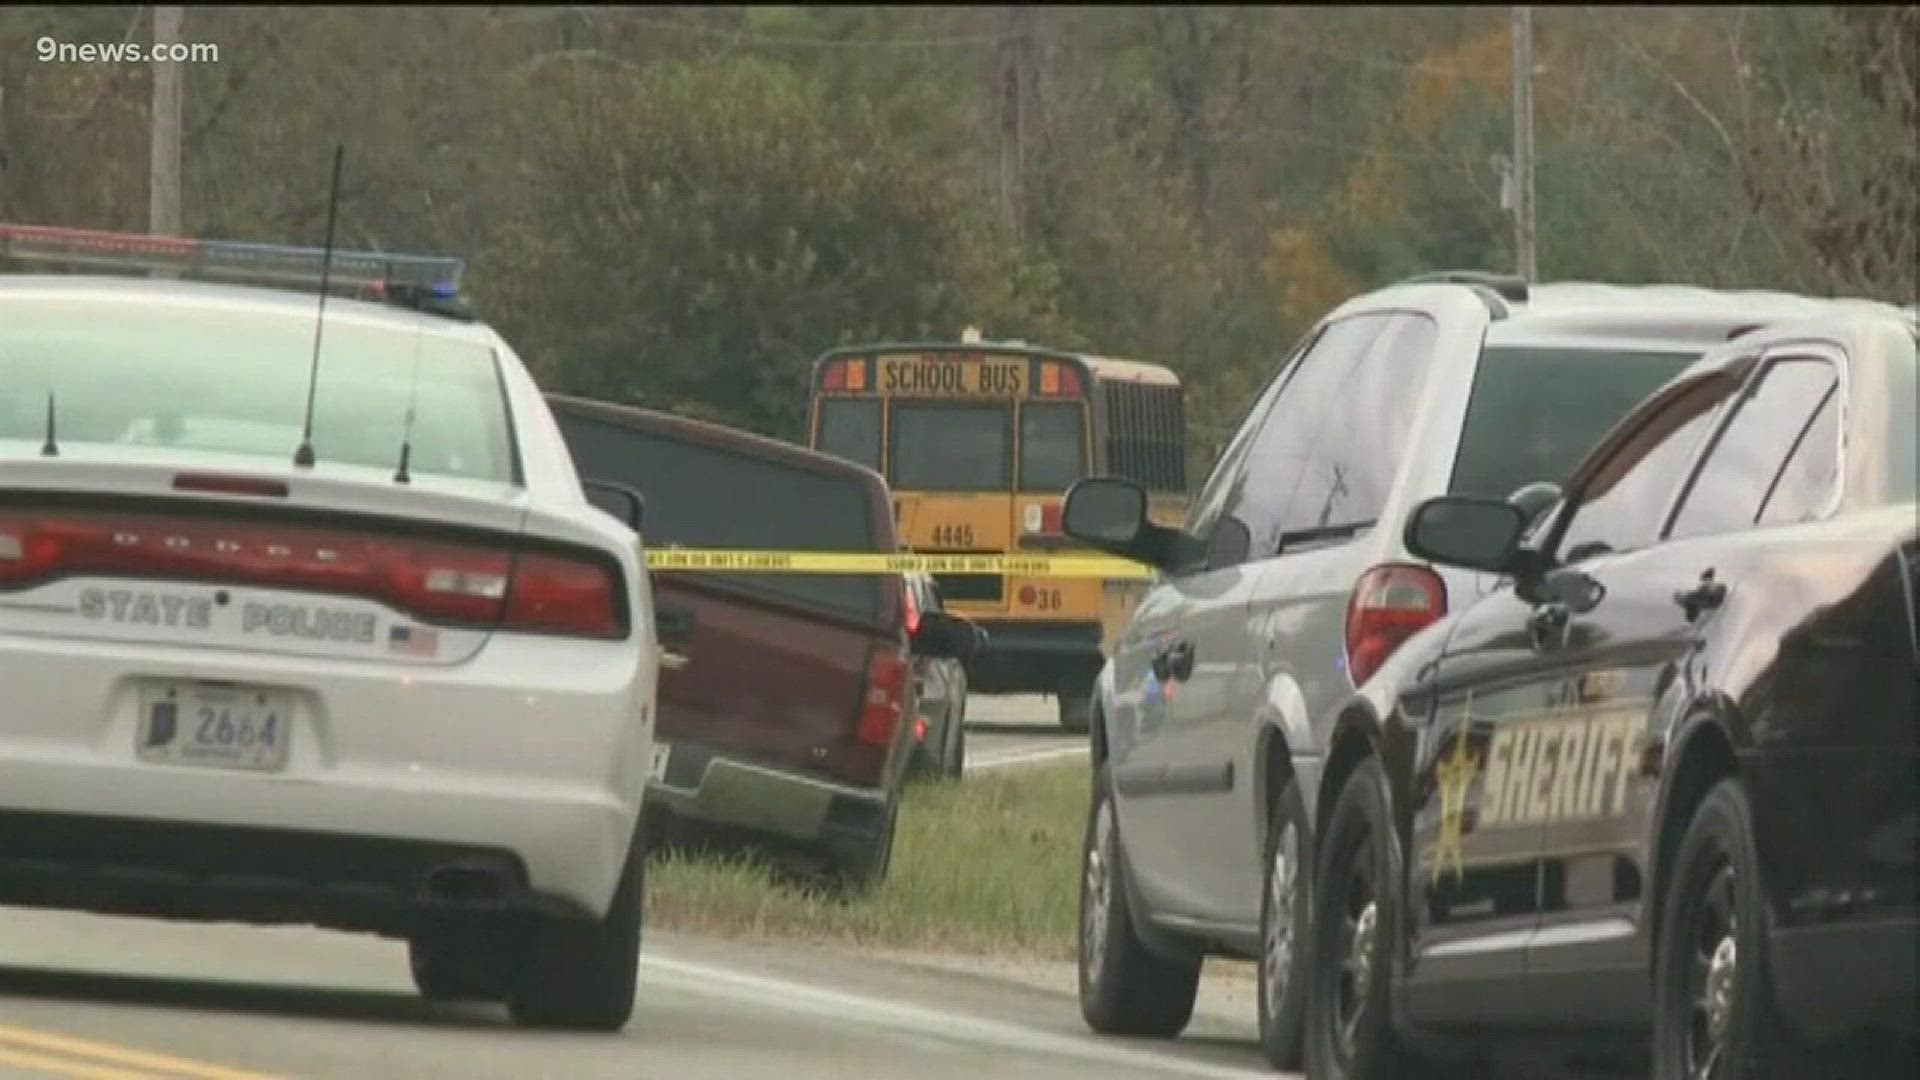 A bus stop crash killed three young siblings in Indiana Tuesday morning. Investigators believe the STOP arm was out when a woman driving a pickup drove past and hit four children. That kind of crash is a parent's worst nightmare. Same goes for bus drivers